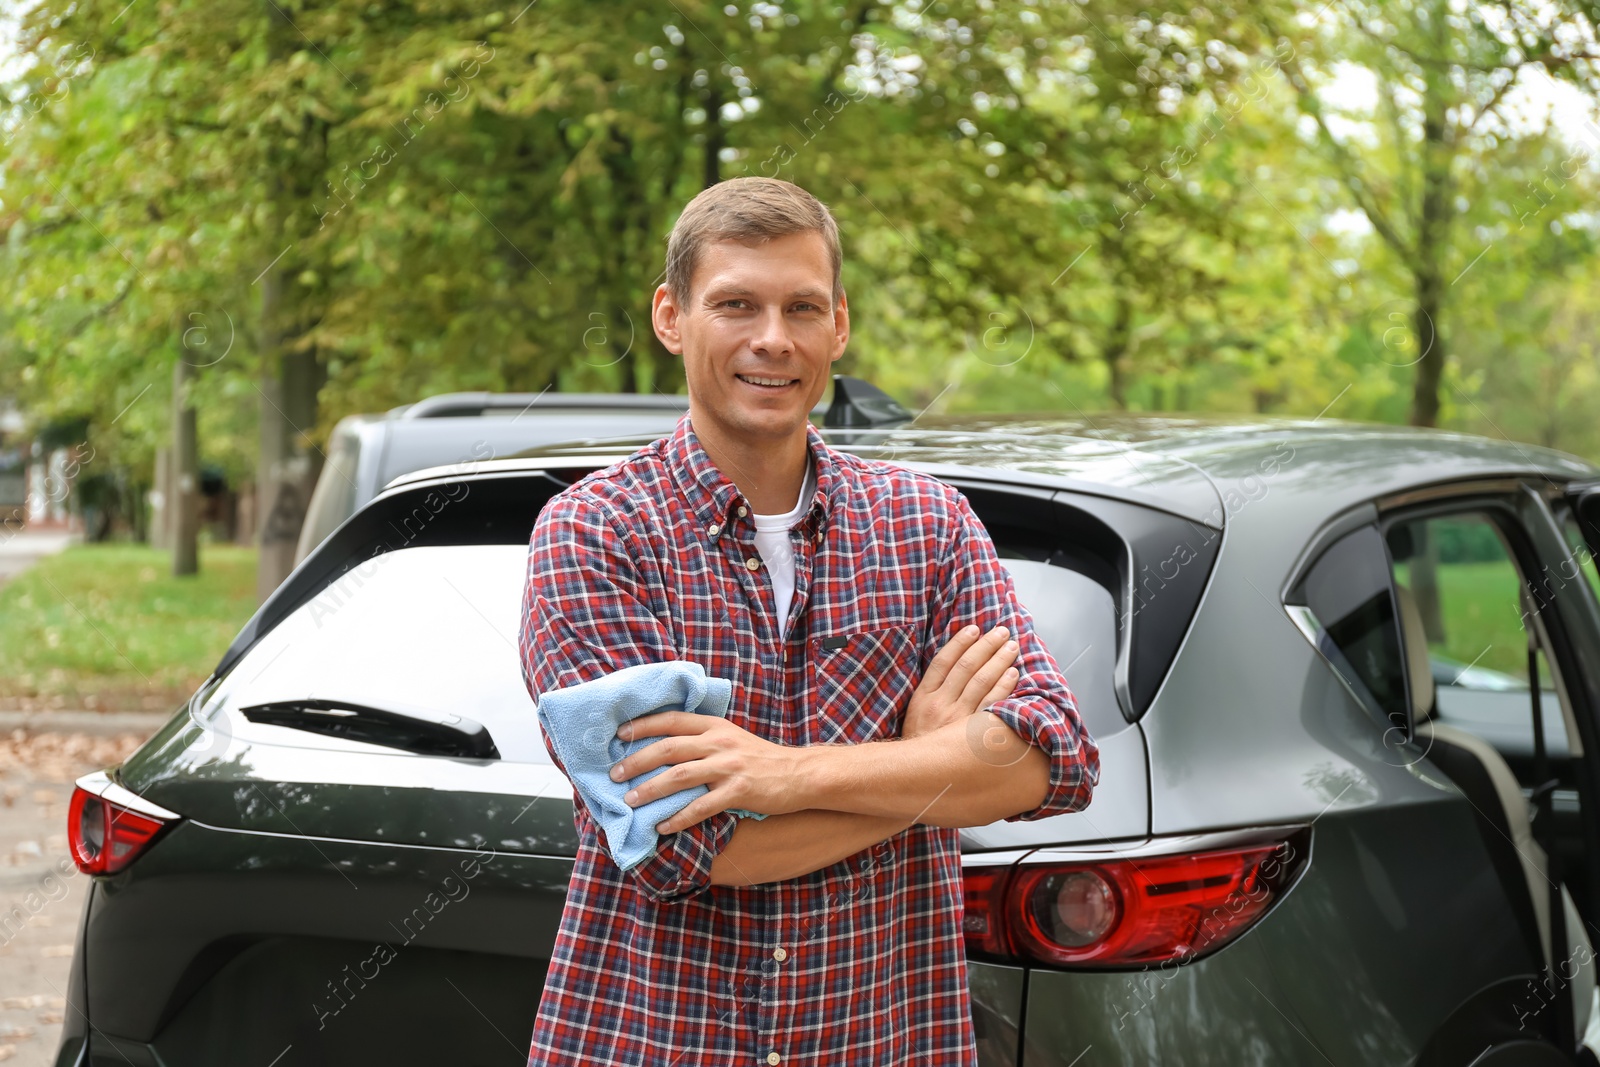 Photo of Man with rug near washed car outdoors